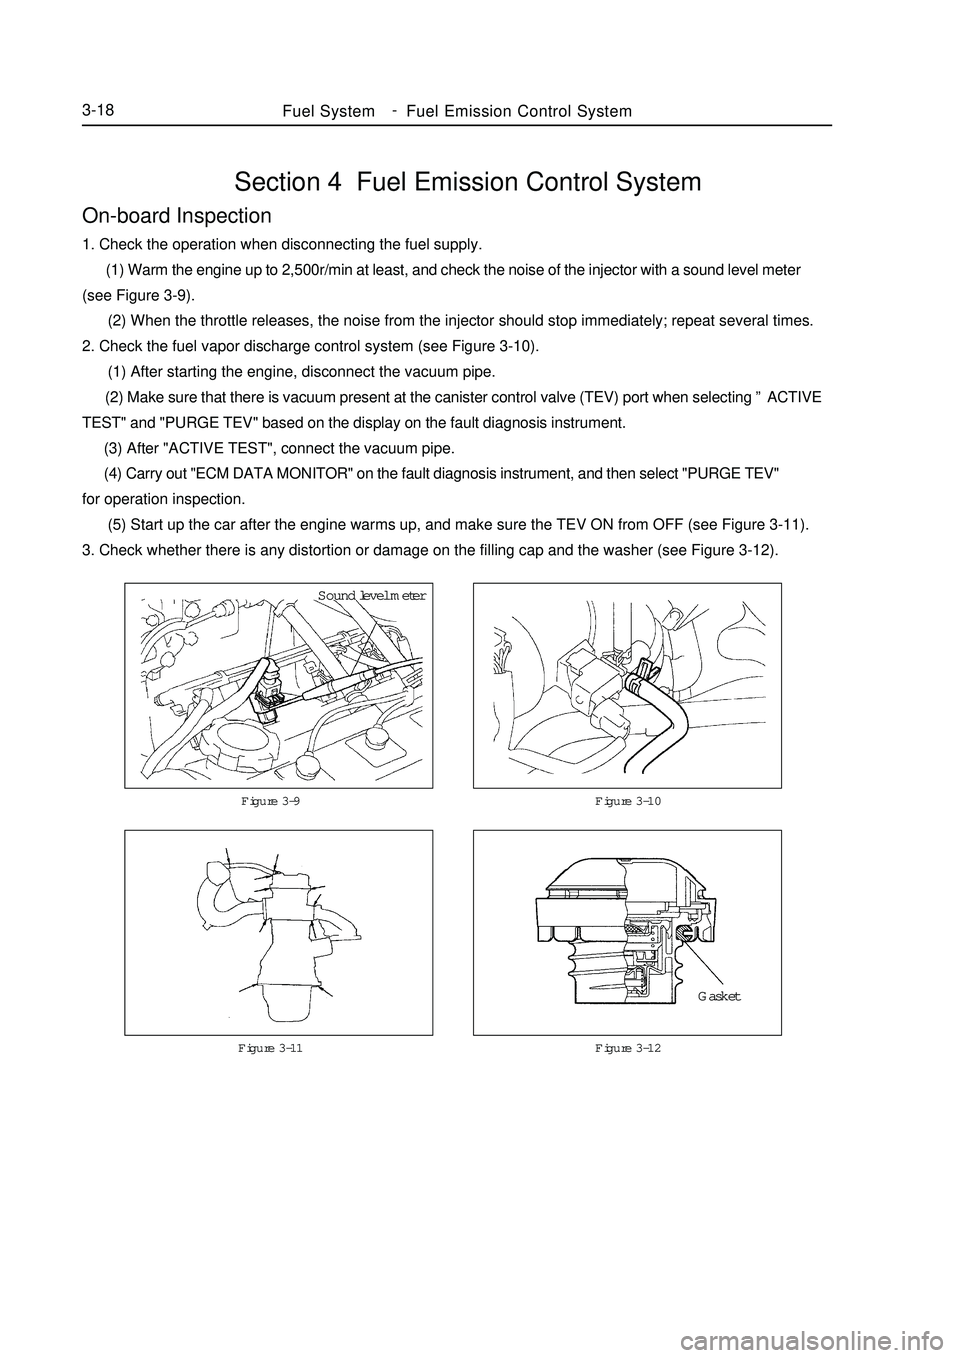 GEELY MK 2008  Workshop Manual Section 4  Fuel Emission Control SystemOn-board Inspection1. Check the operation when disconnecting the fuel supply.
      (1) Warm the engine up to 2,500r/min at least, and check the noise of the inj